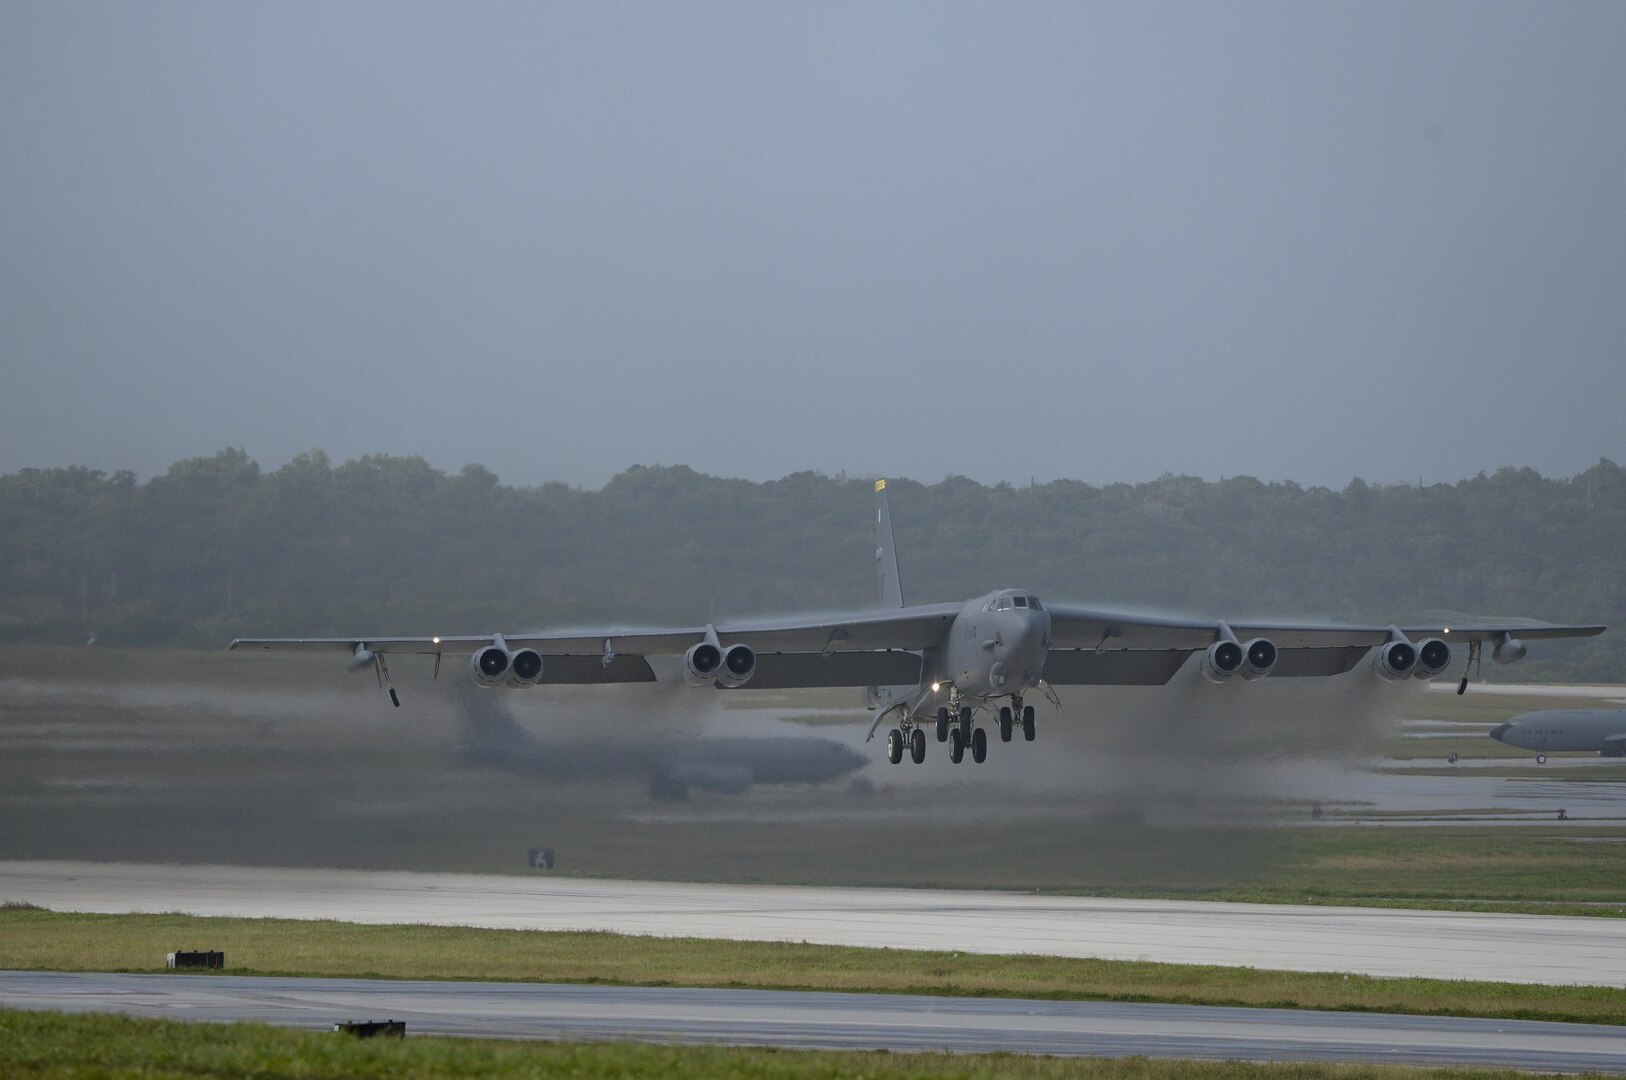 A U.S. Air Force B-52 Stratofortress takes off from Andersen Air Force Base, Guam, after a short deployment Dec. 17, 2016. This short-term deployment helped to ensure the bomber crews maintain a high state of readiness and crew proficiency, and provided opportunities to integrate capabilities with regional partners in the Indo-Asia-Pacific region.